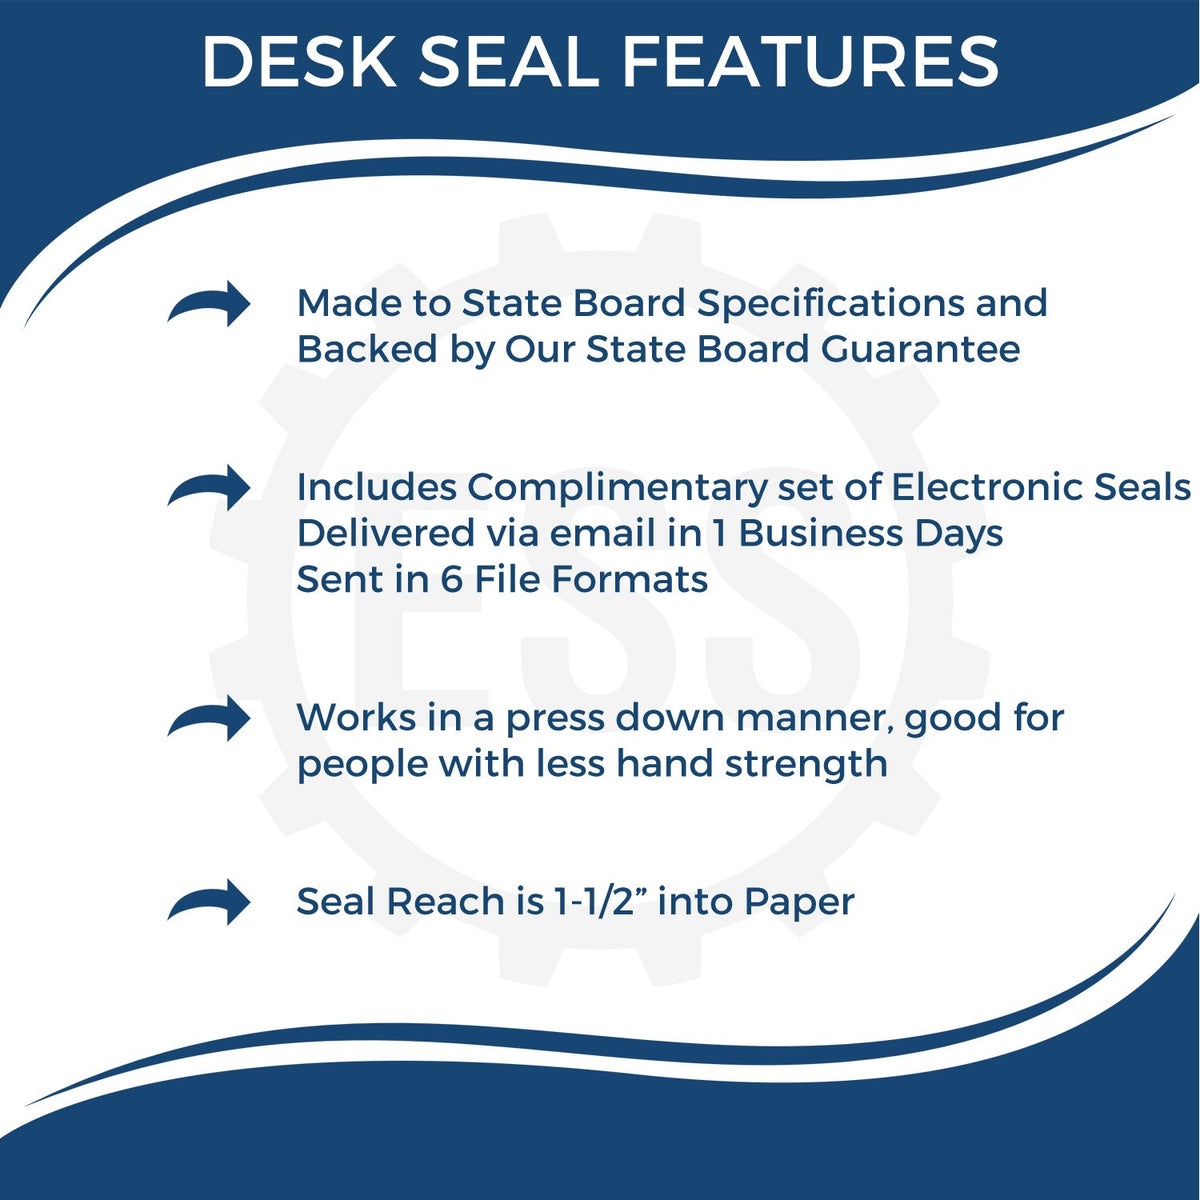 A picture of an infographic highlighting the selling points for the District of Columbia Engineer Desk Seal